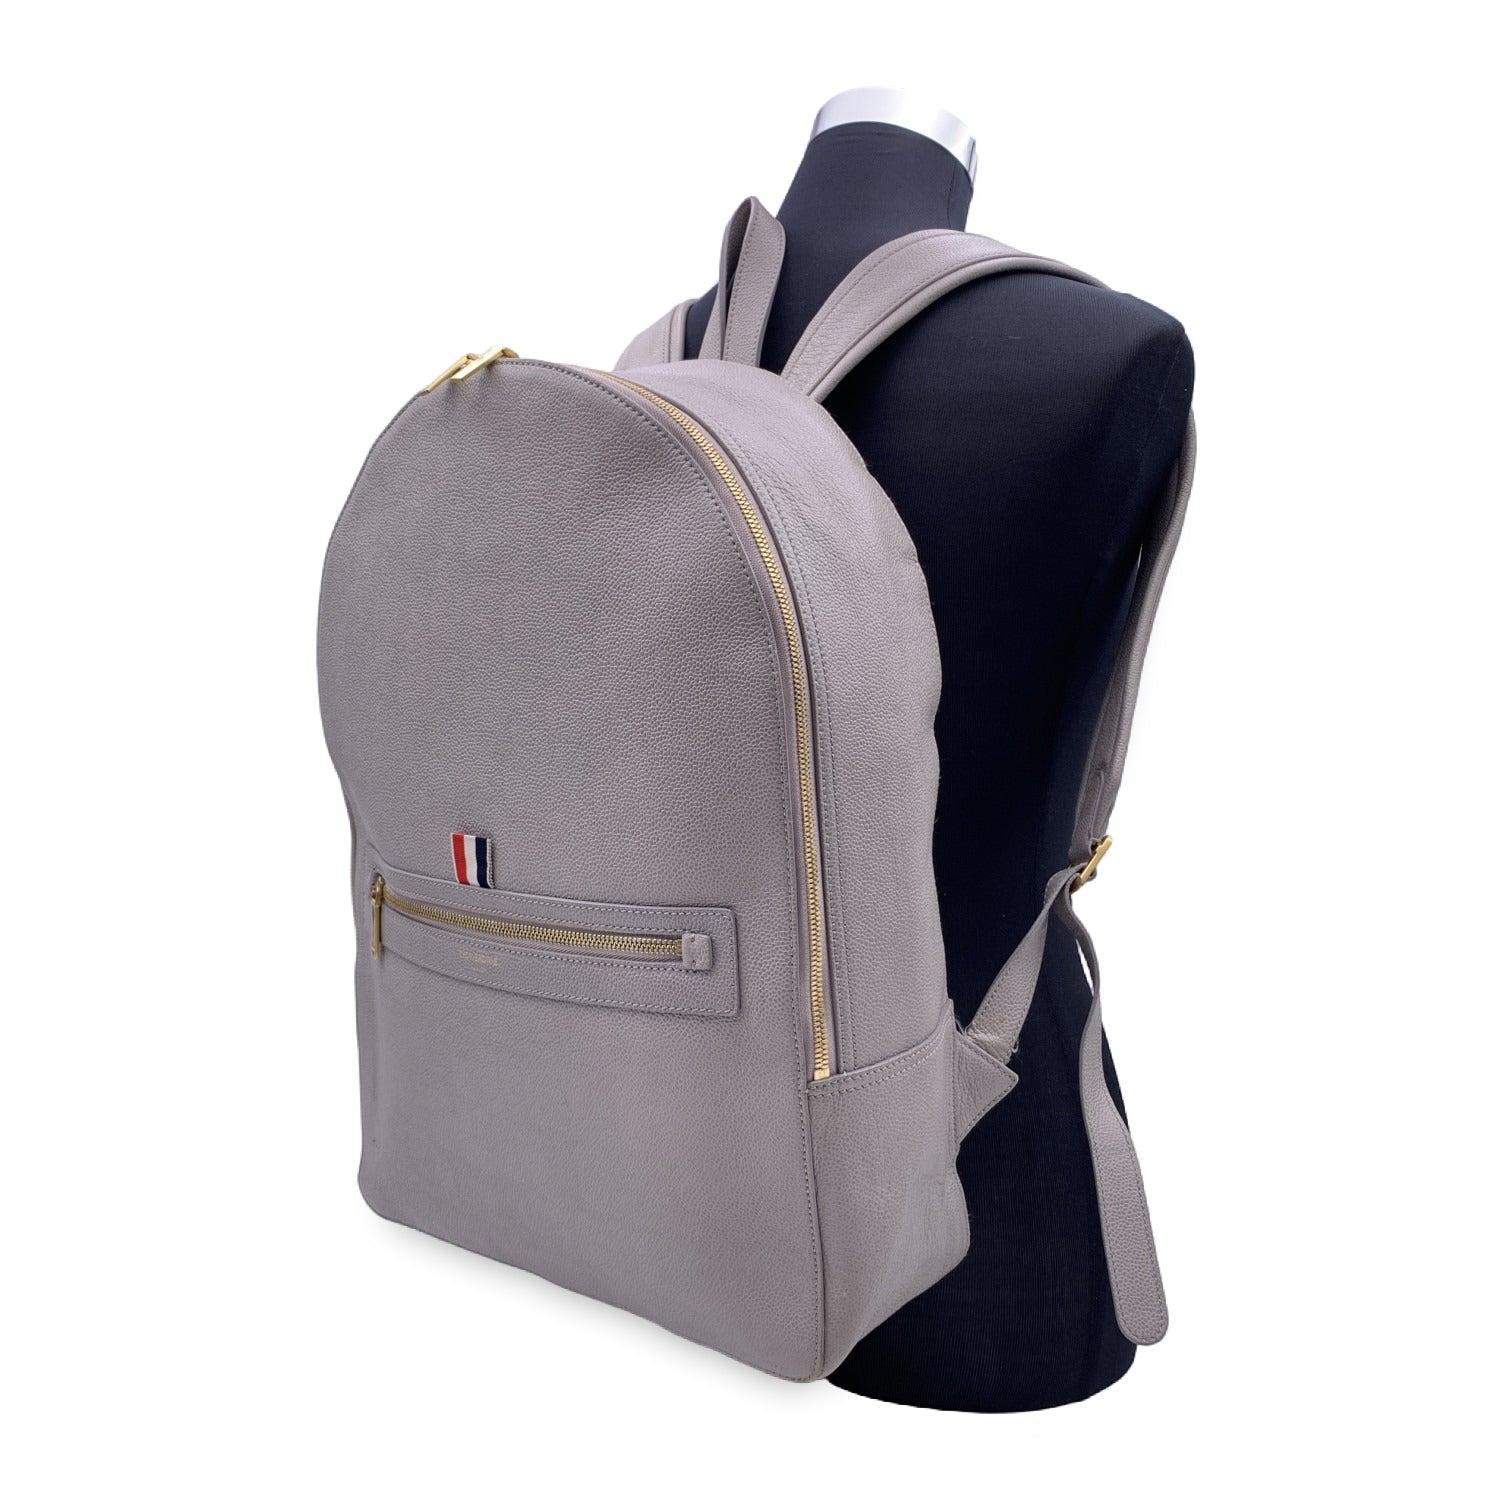 Thom Browne Classic Backpack Bag in Grey Pebble Grain leather. It features a tricolor Grosgrain loop tab and designer's signature in gold metal on the front. Single top handle, double adjustable back straps. Zip around closure. 1 zipper pocket on